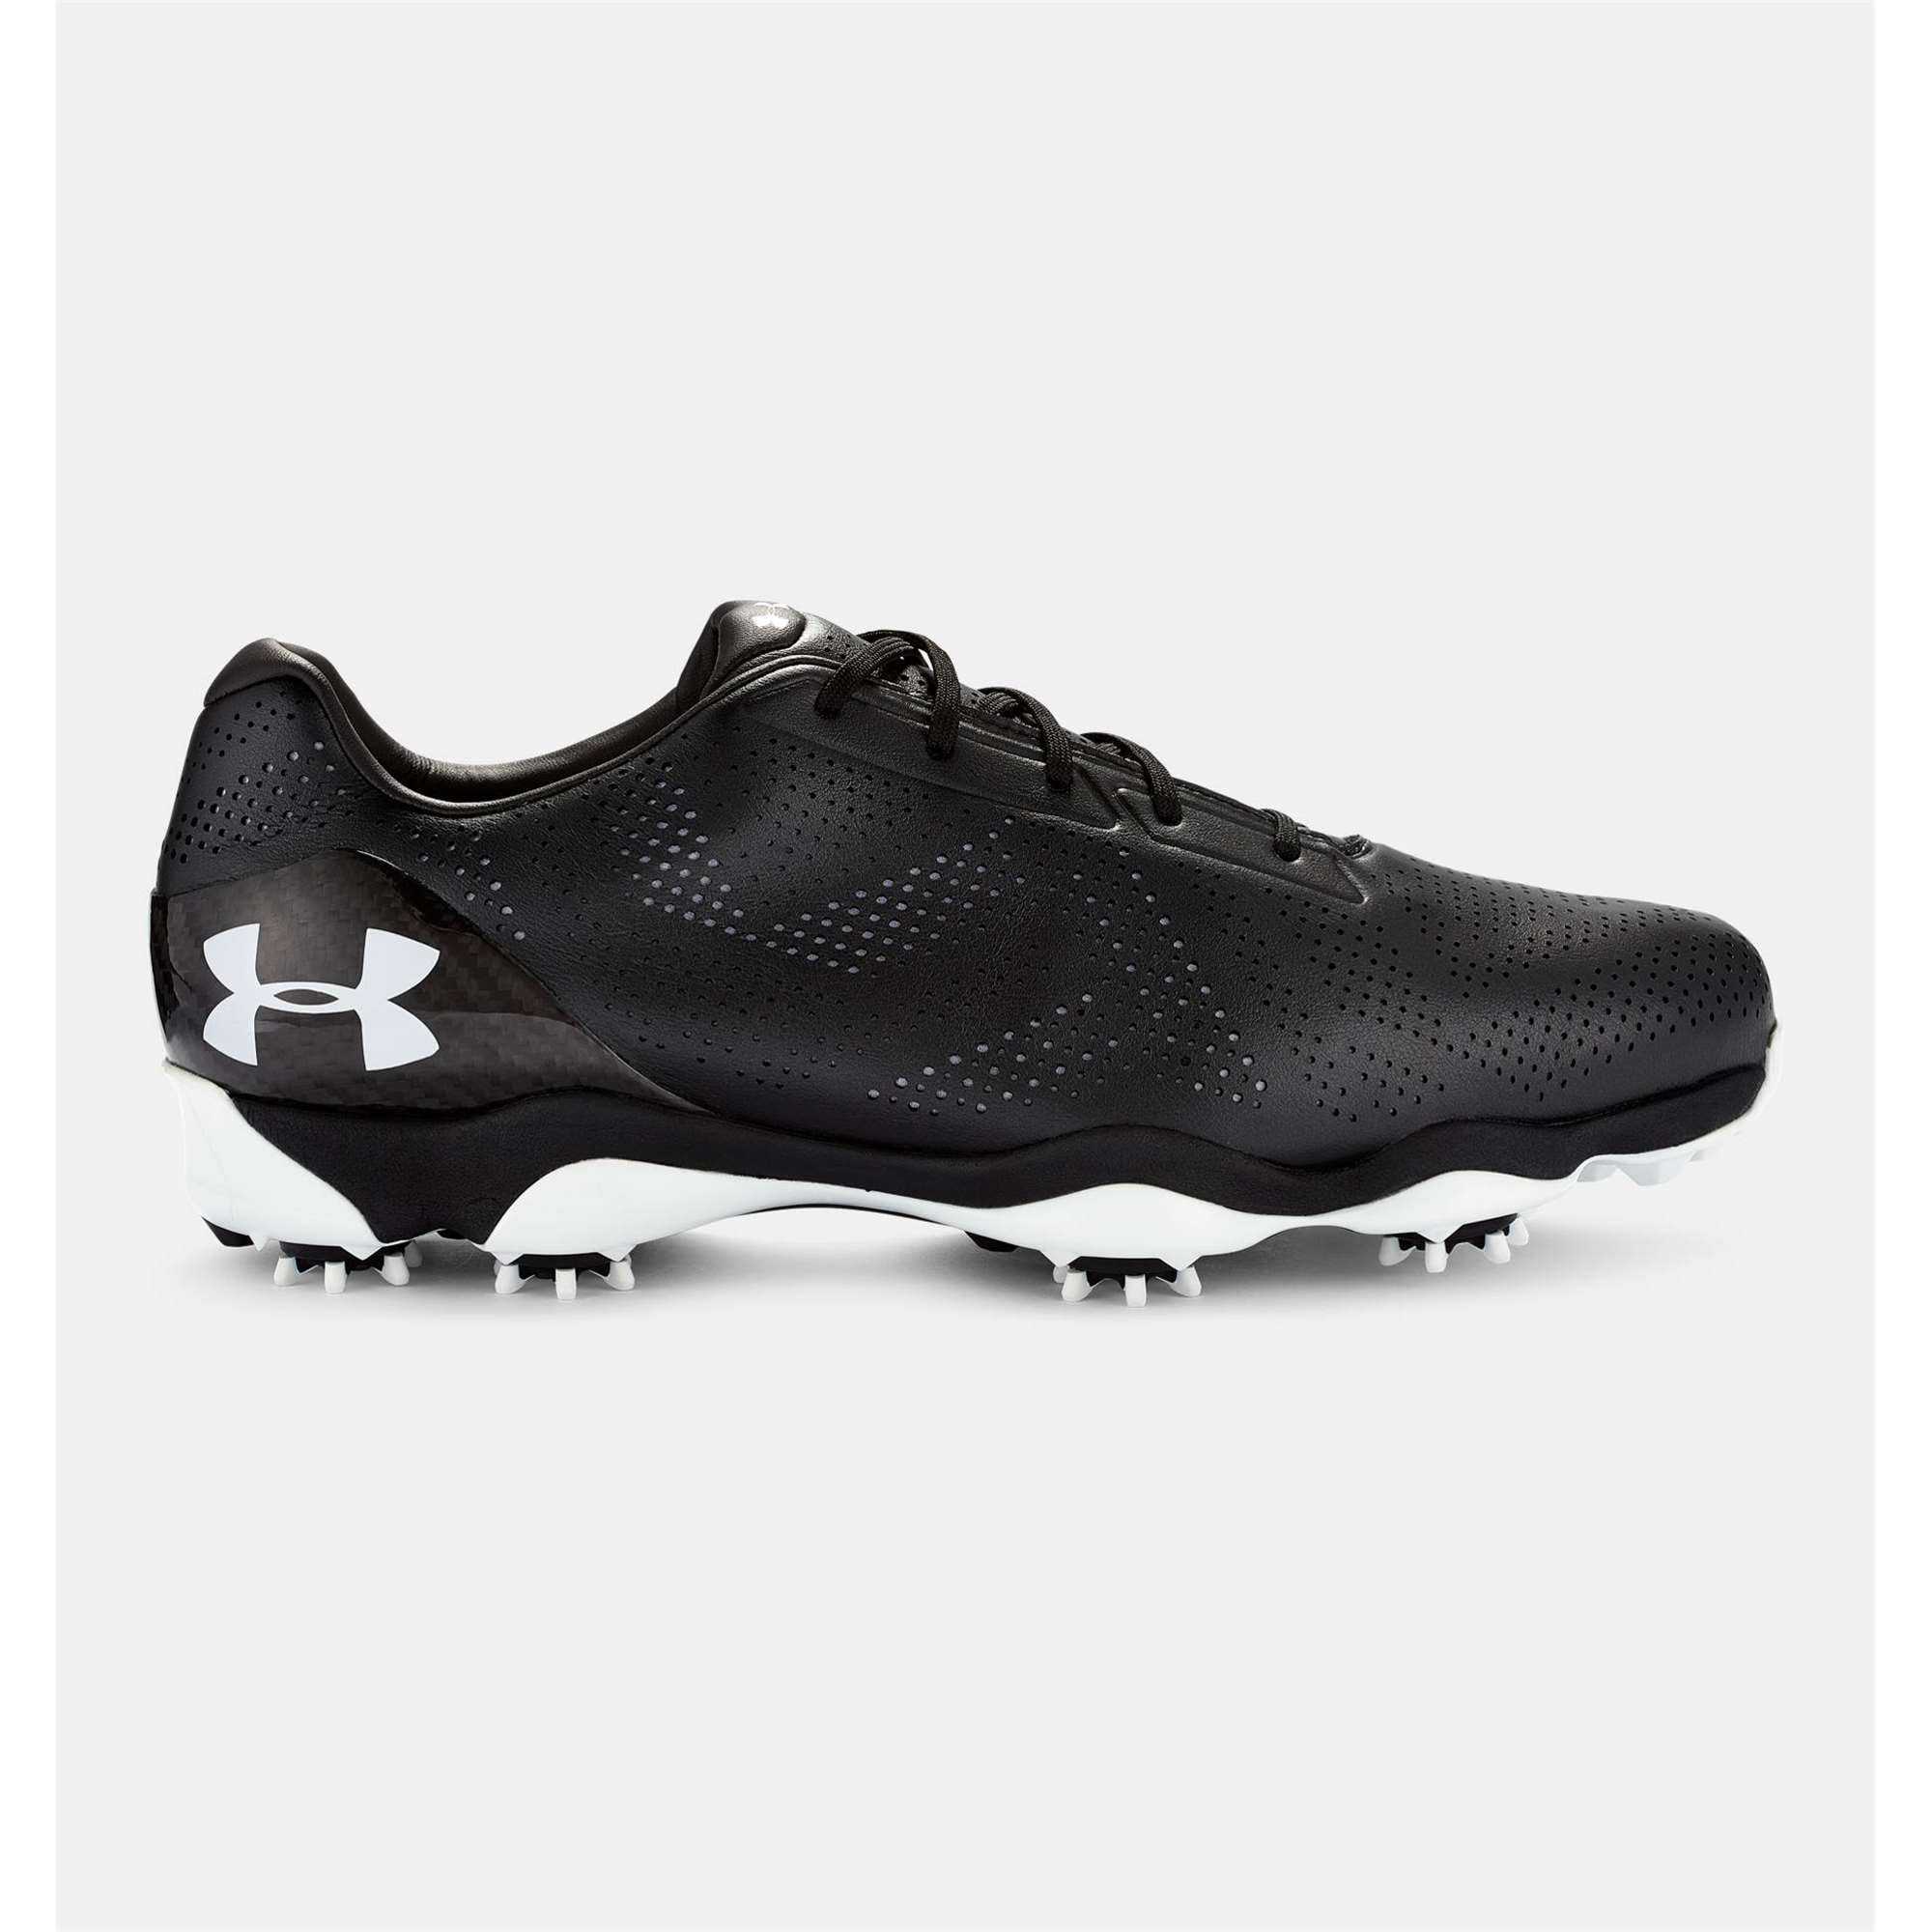 Under Armour Men Drive One Golf Shoes 